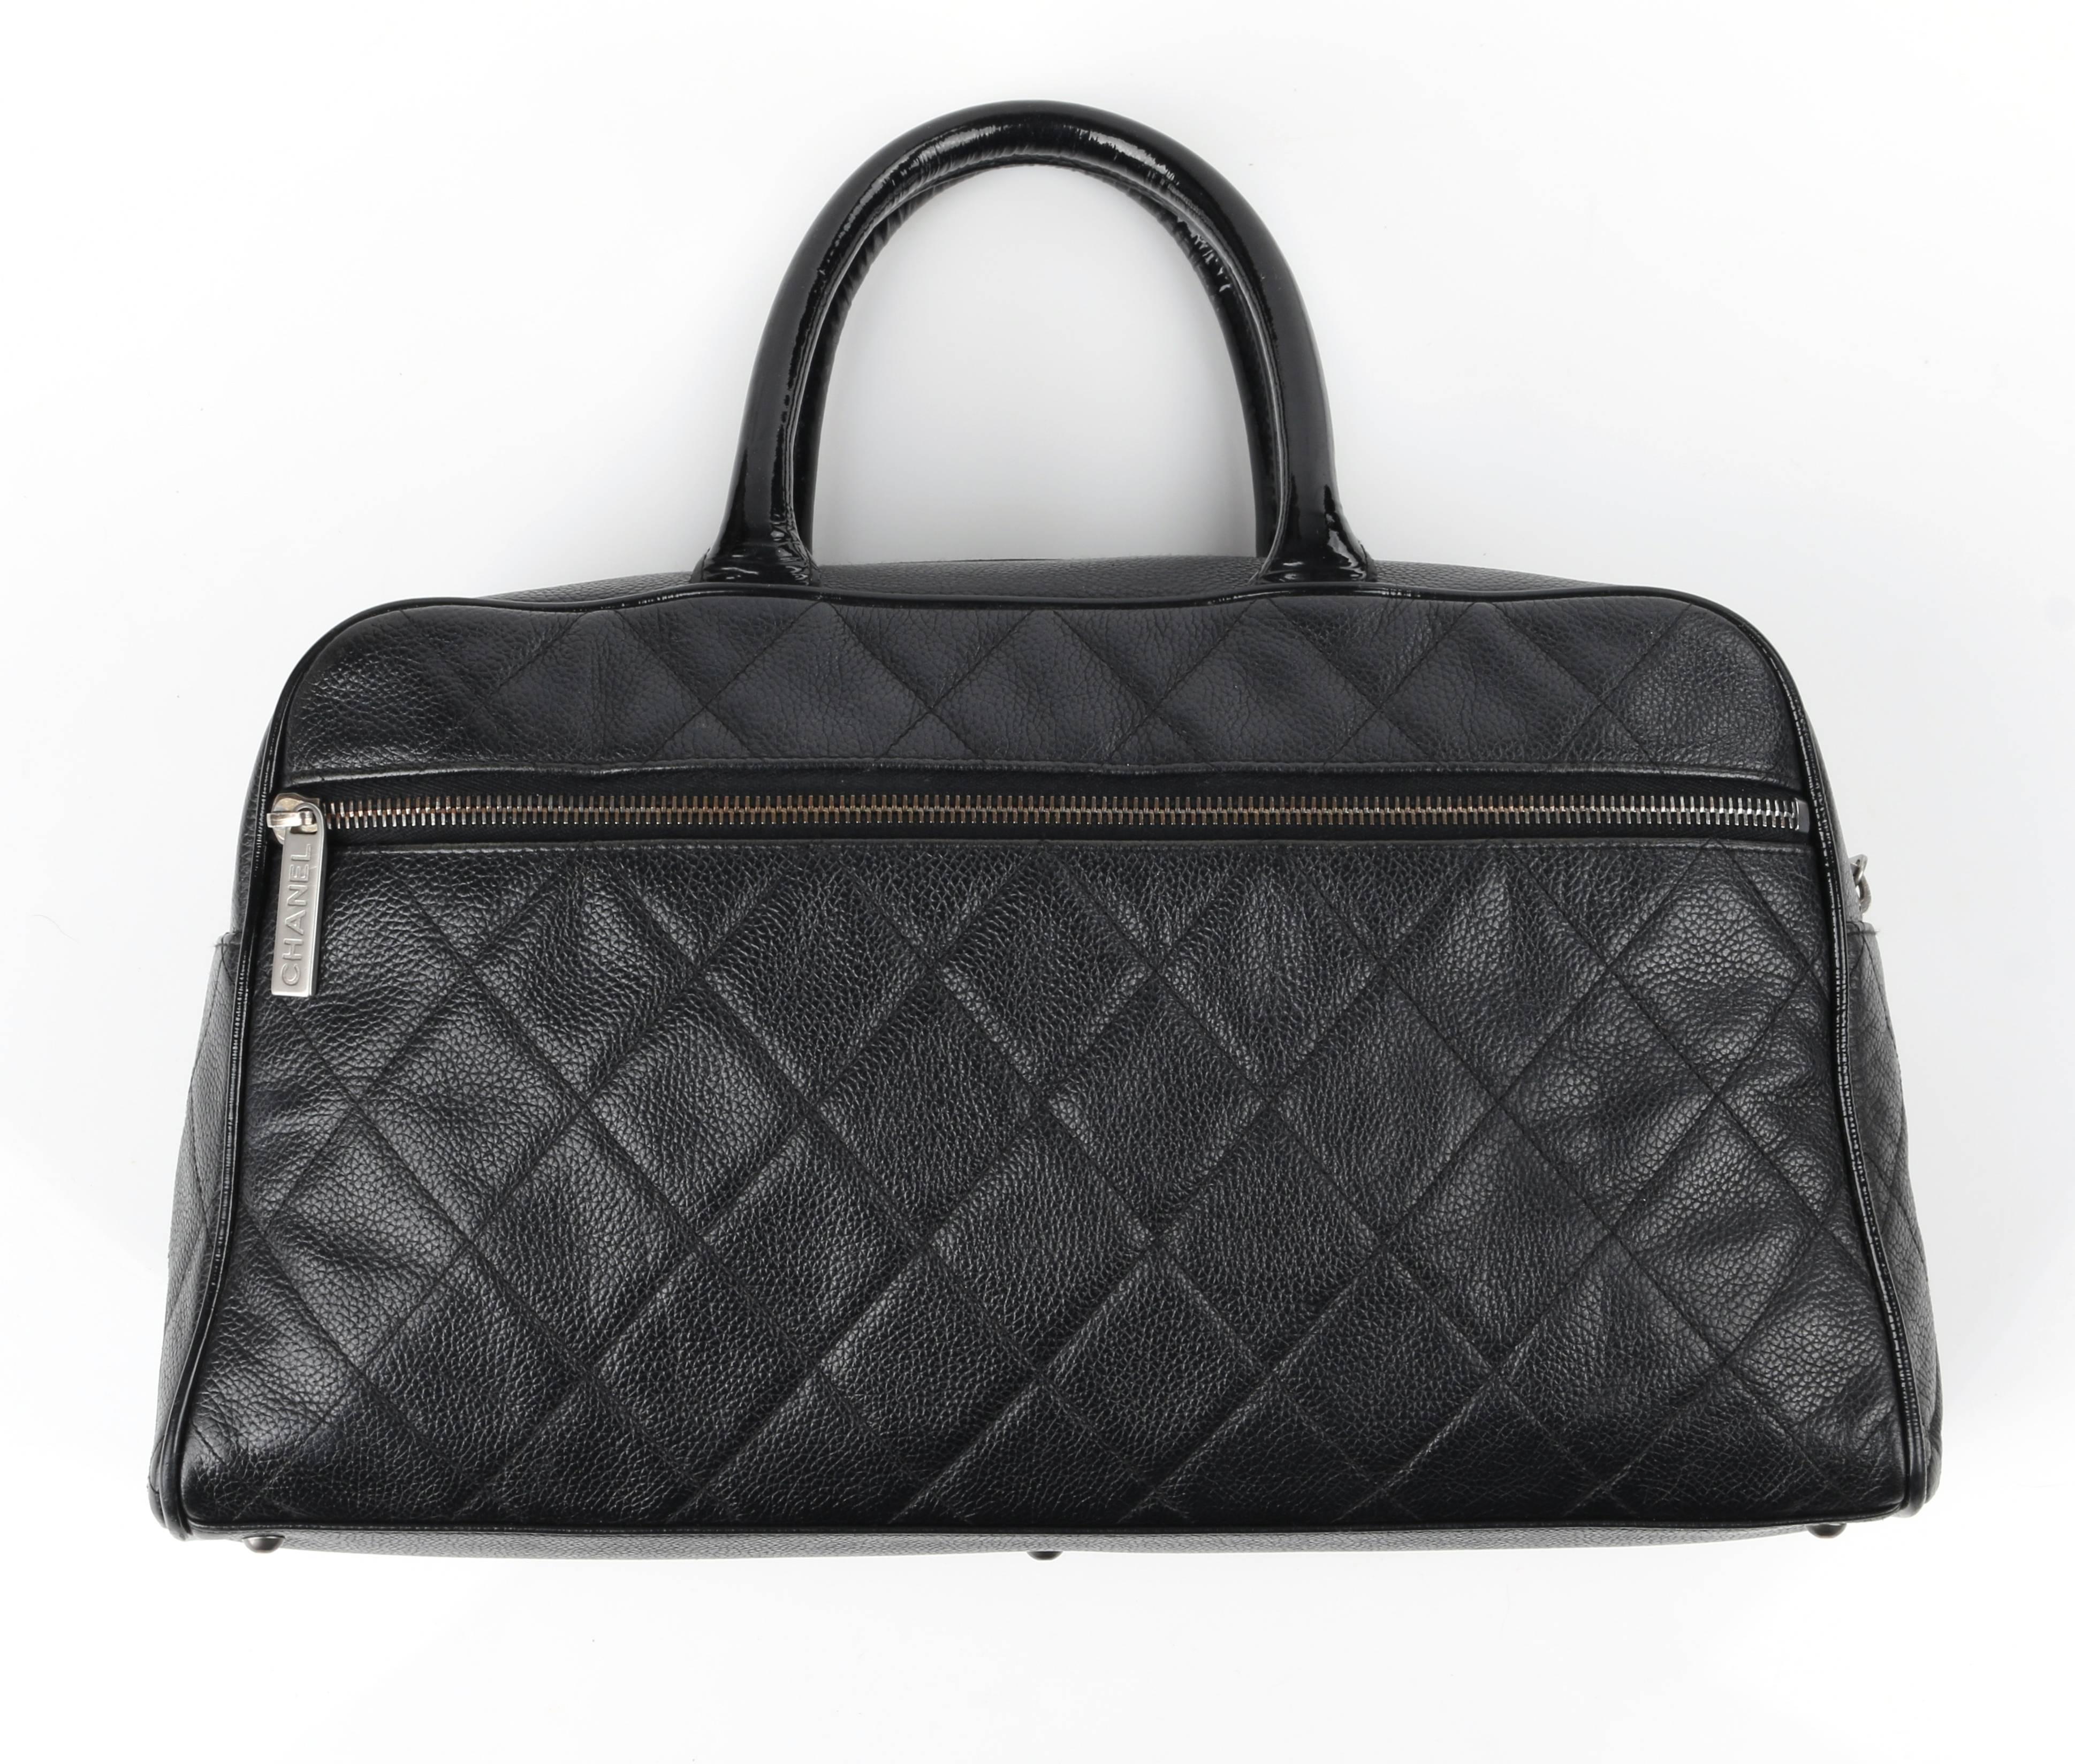 Chanel caviar (black) diamond quilted and patent leather boston / bowler bag. Designed by Karl Lagerfeld. Black diamond quilted leather body with patent leather piping. Two black patent leather single rolled top handles. Center front 